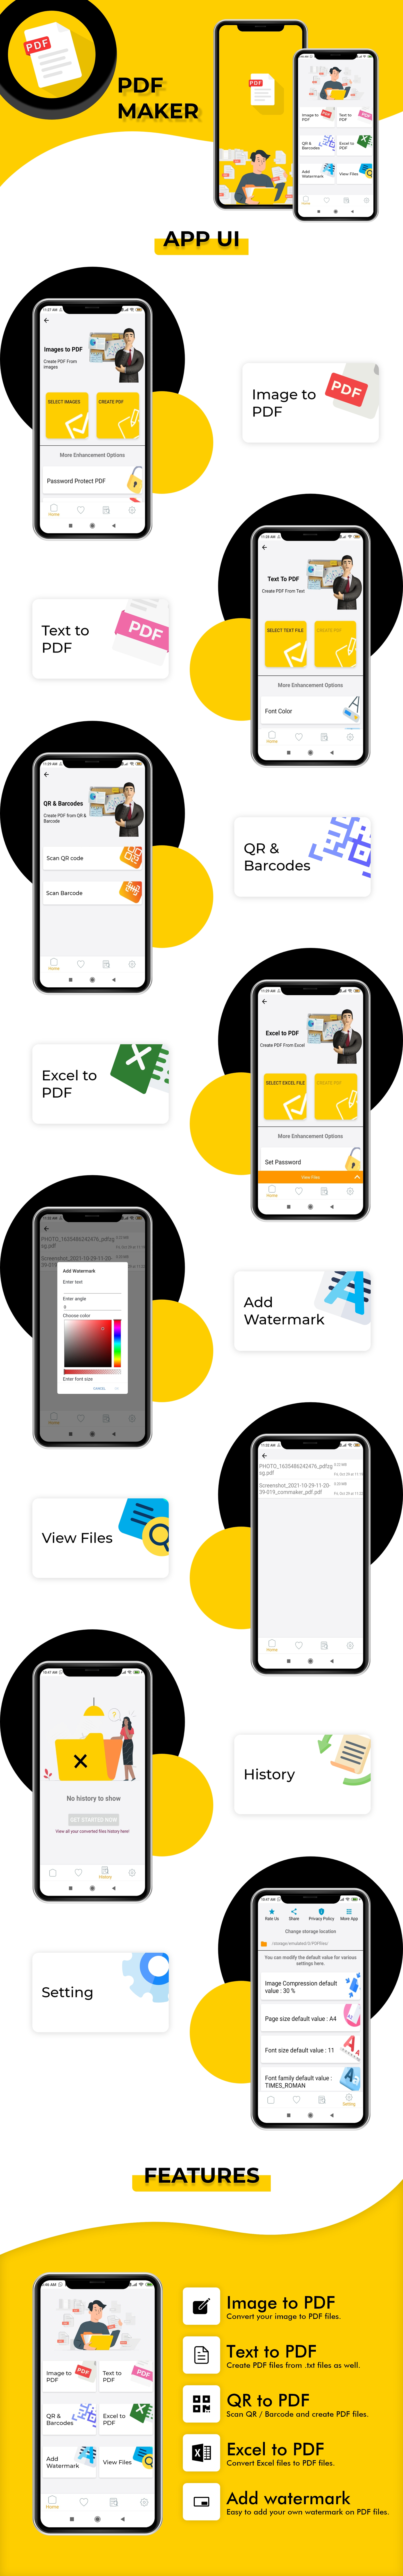 PDF Converter, PDF Editor and Image To PDF Converter for Android - Admob Ads - 1